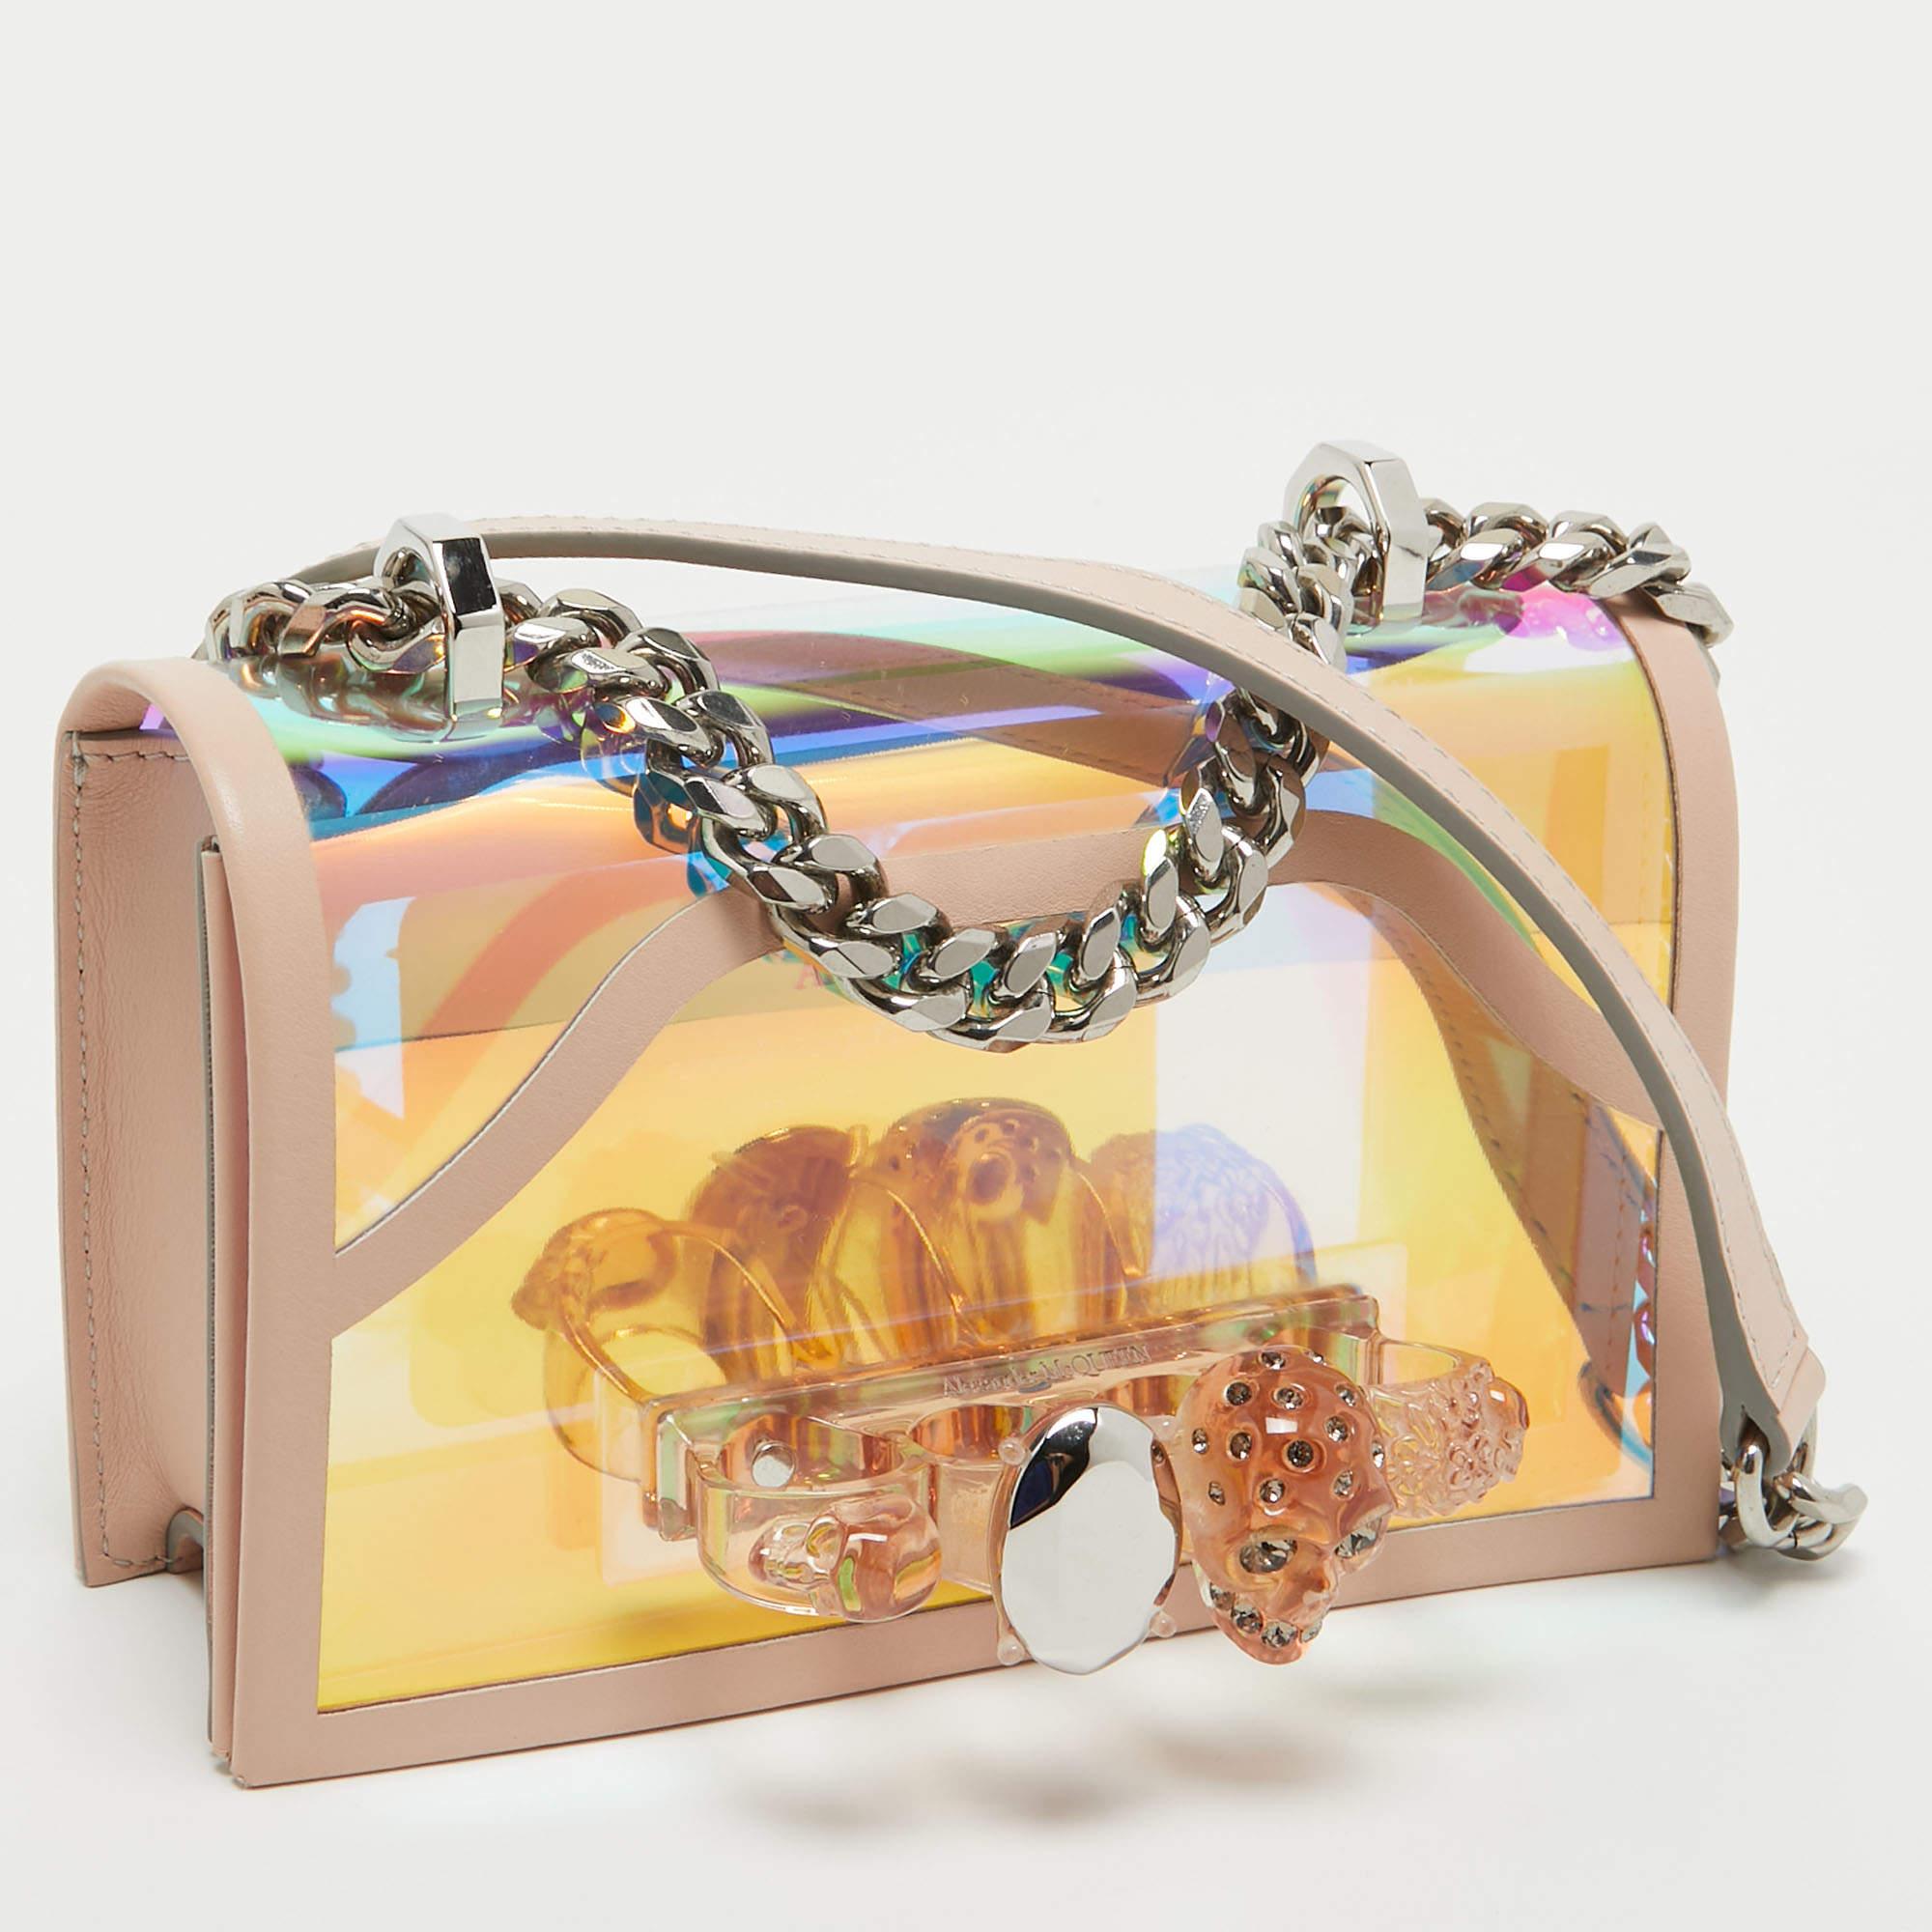 Alexander McQueen Holographic/Pink Pvc and Leather Knuckle Duster Shoulder Bag In Excellent Condition For Sale In Dubai, Al Qouz 2